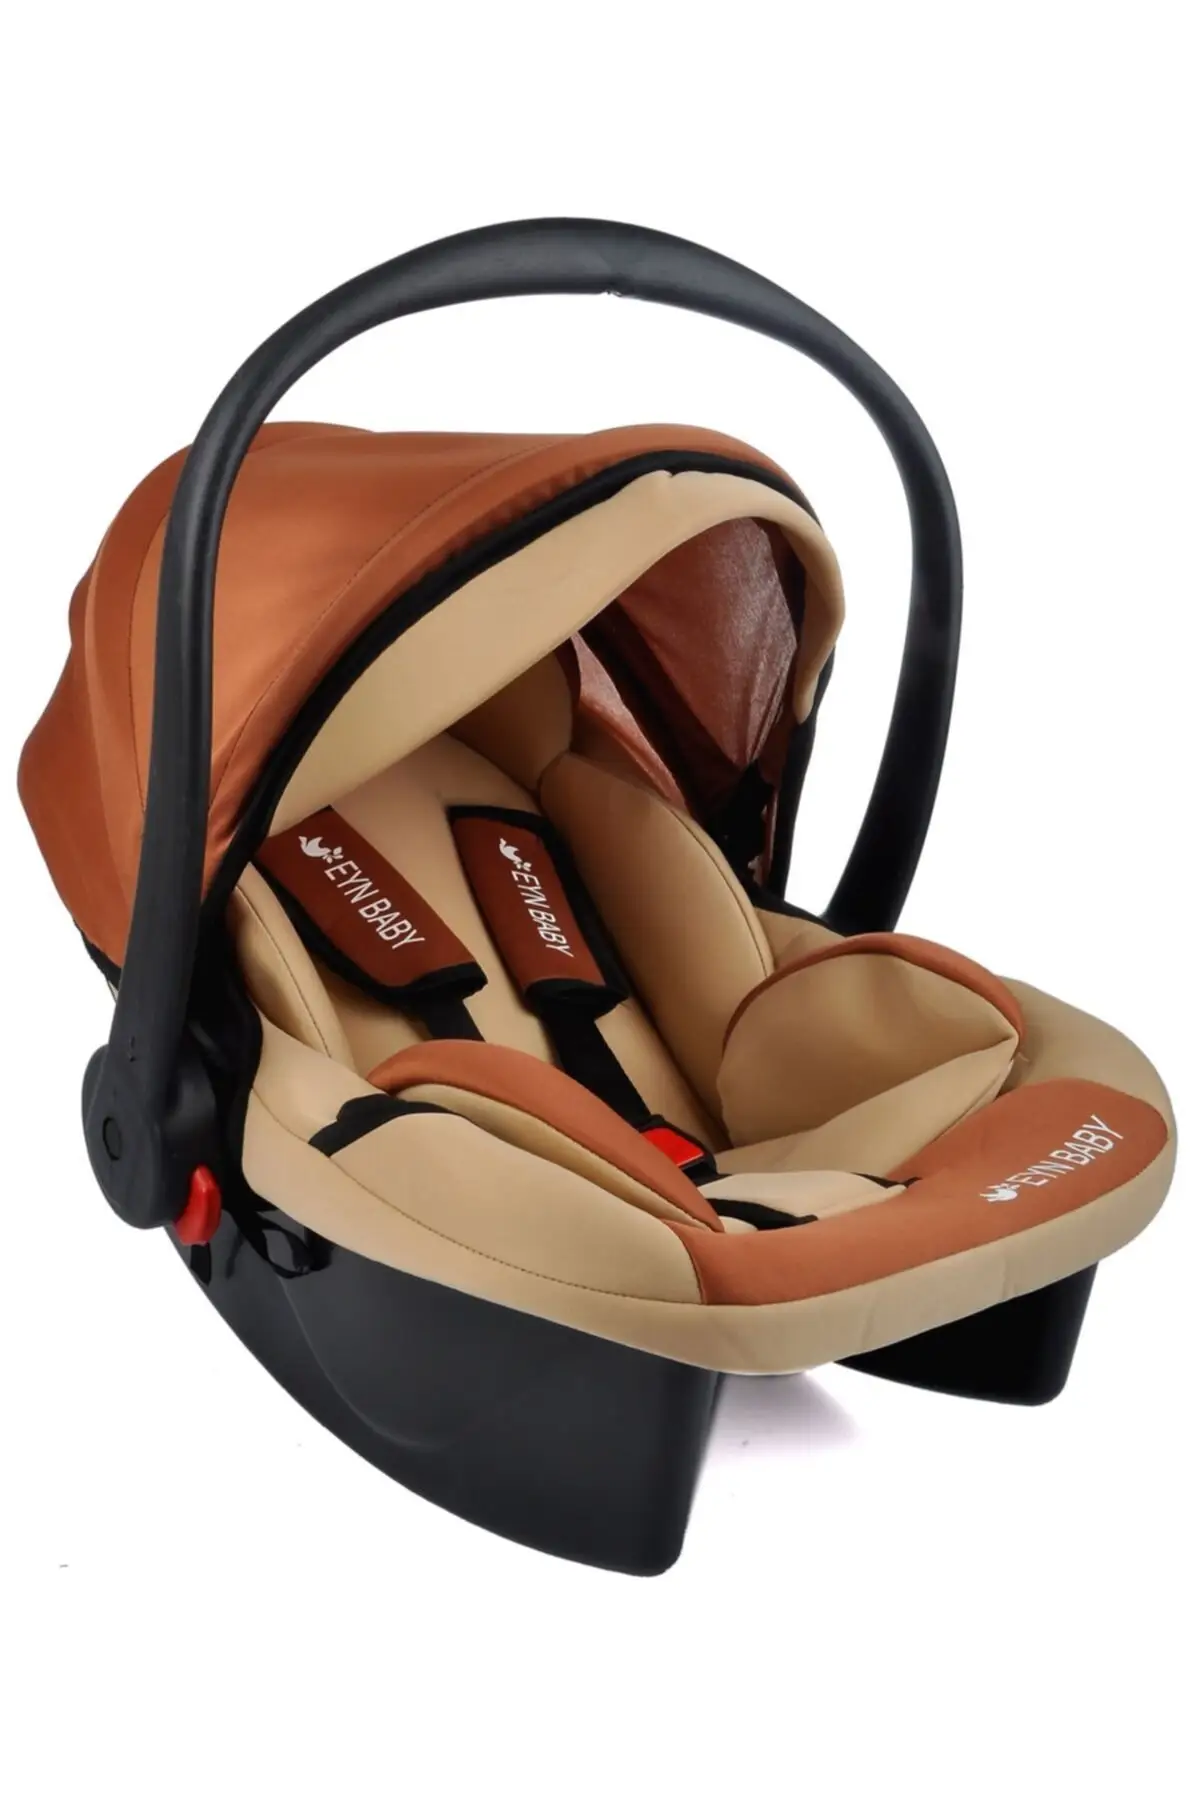 Carrying a Baby with Luxury Pads, Baby Carrying chair, rocking chair, baby carrying cradle, baby crib